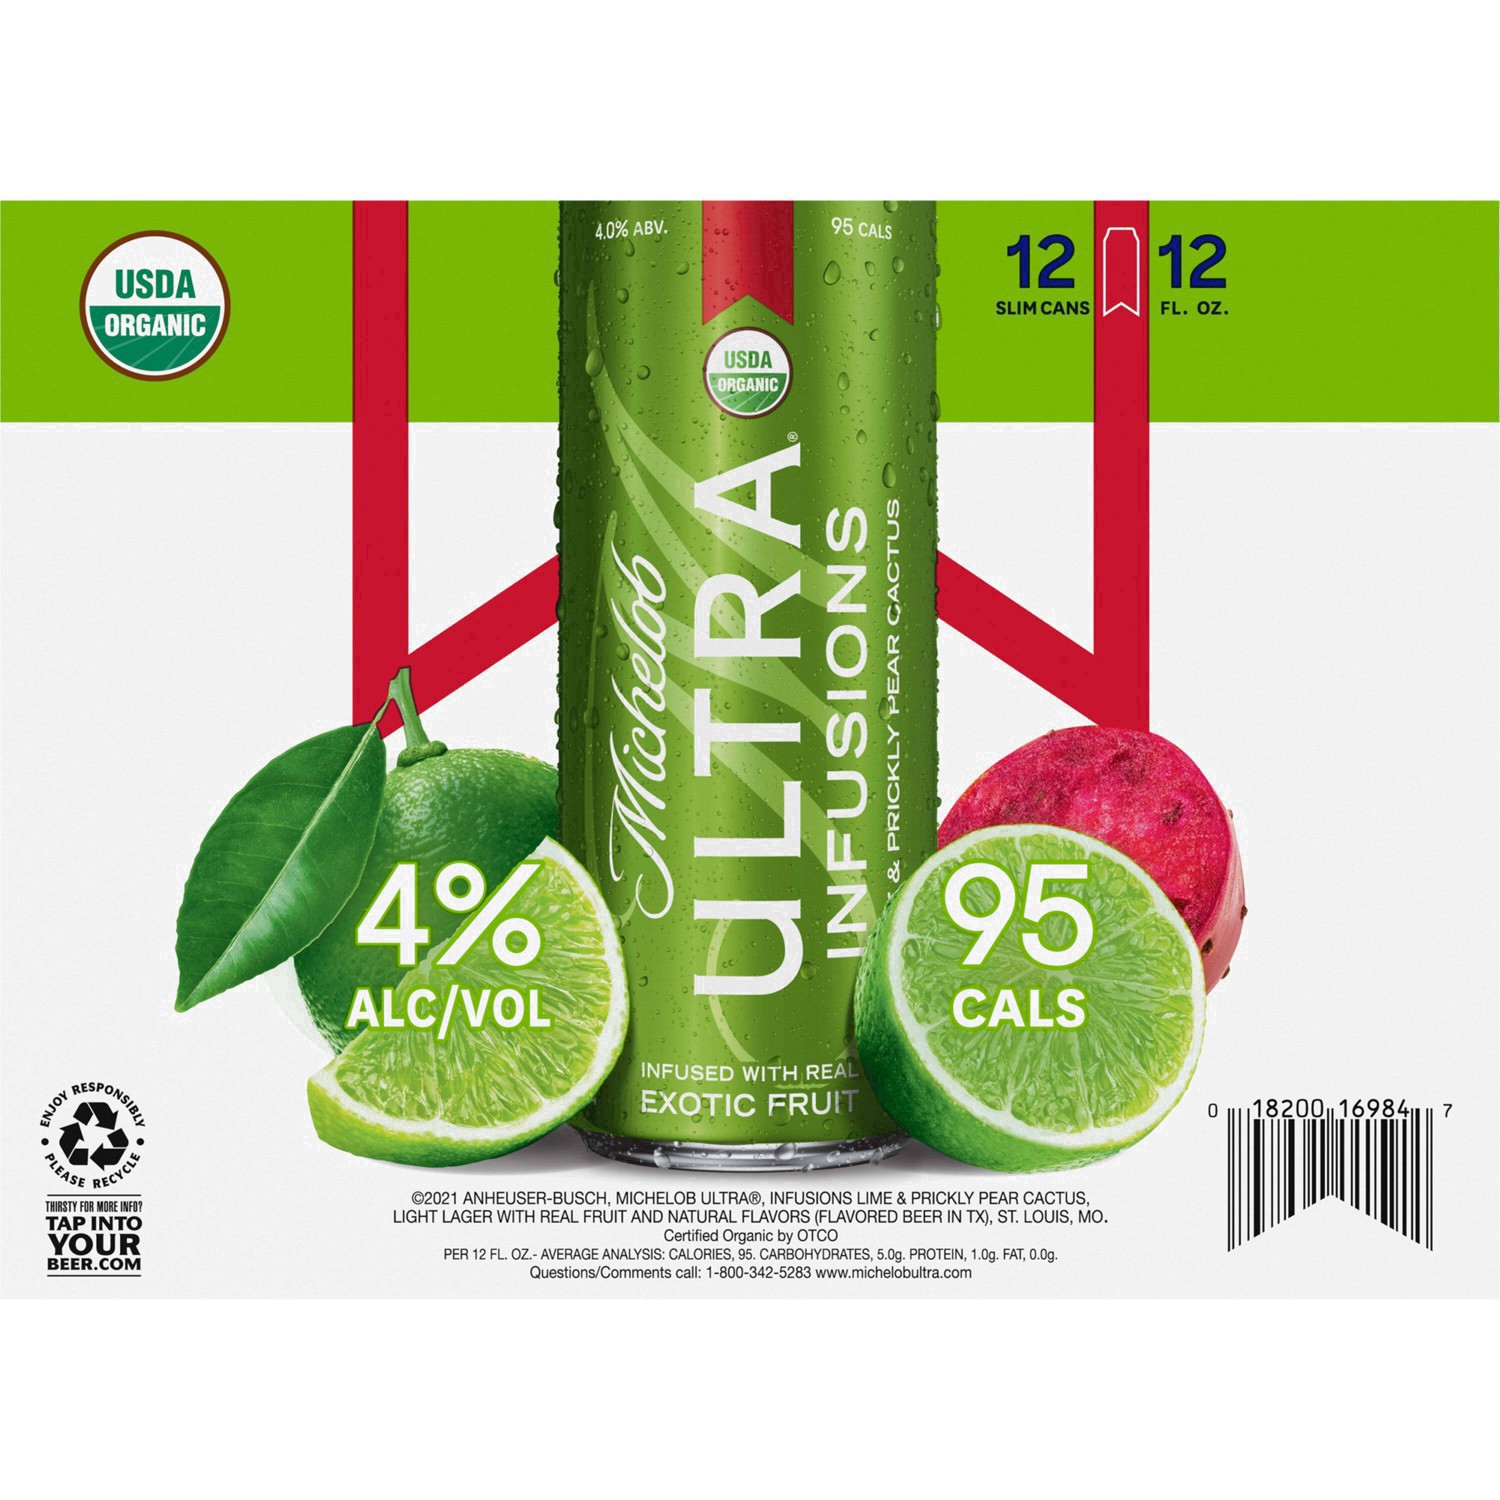 slide 64 of 99, Michelob Ultra Infusions Lime & Prickly Pear Cactus Light Beer, 4% ABV, 12 ct; 12 fl oz